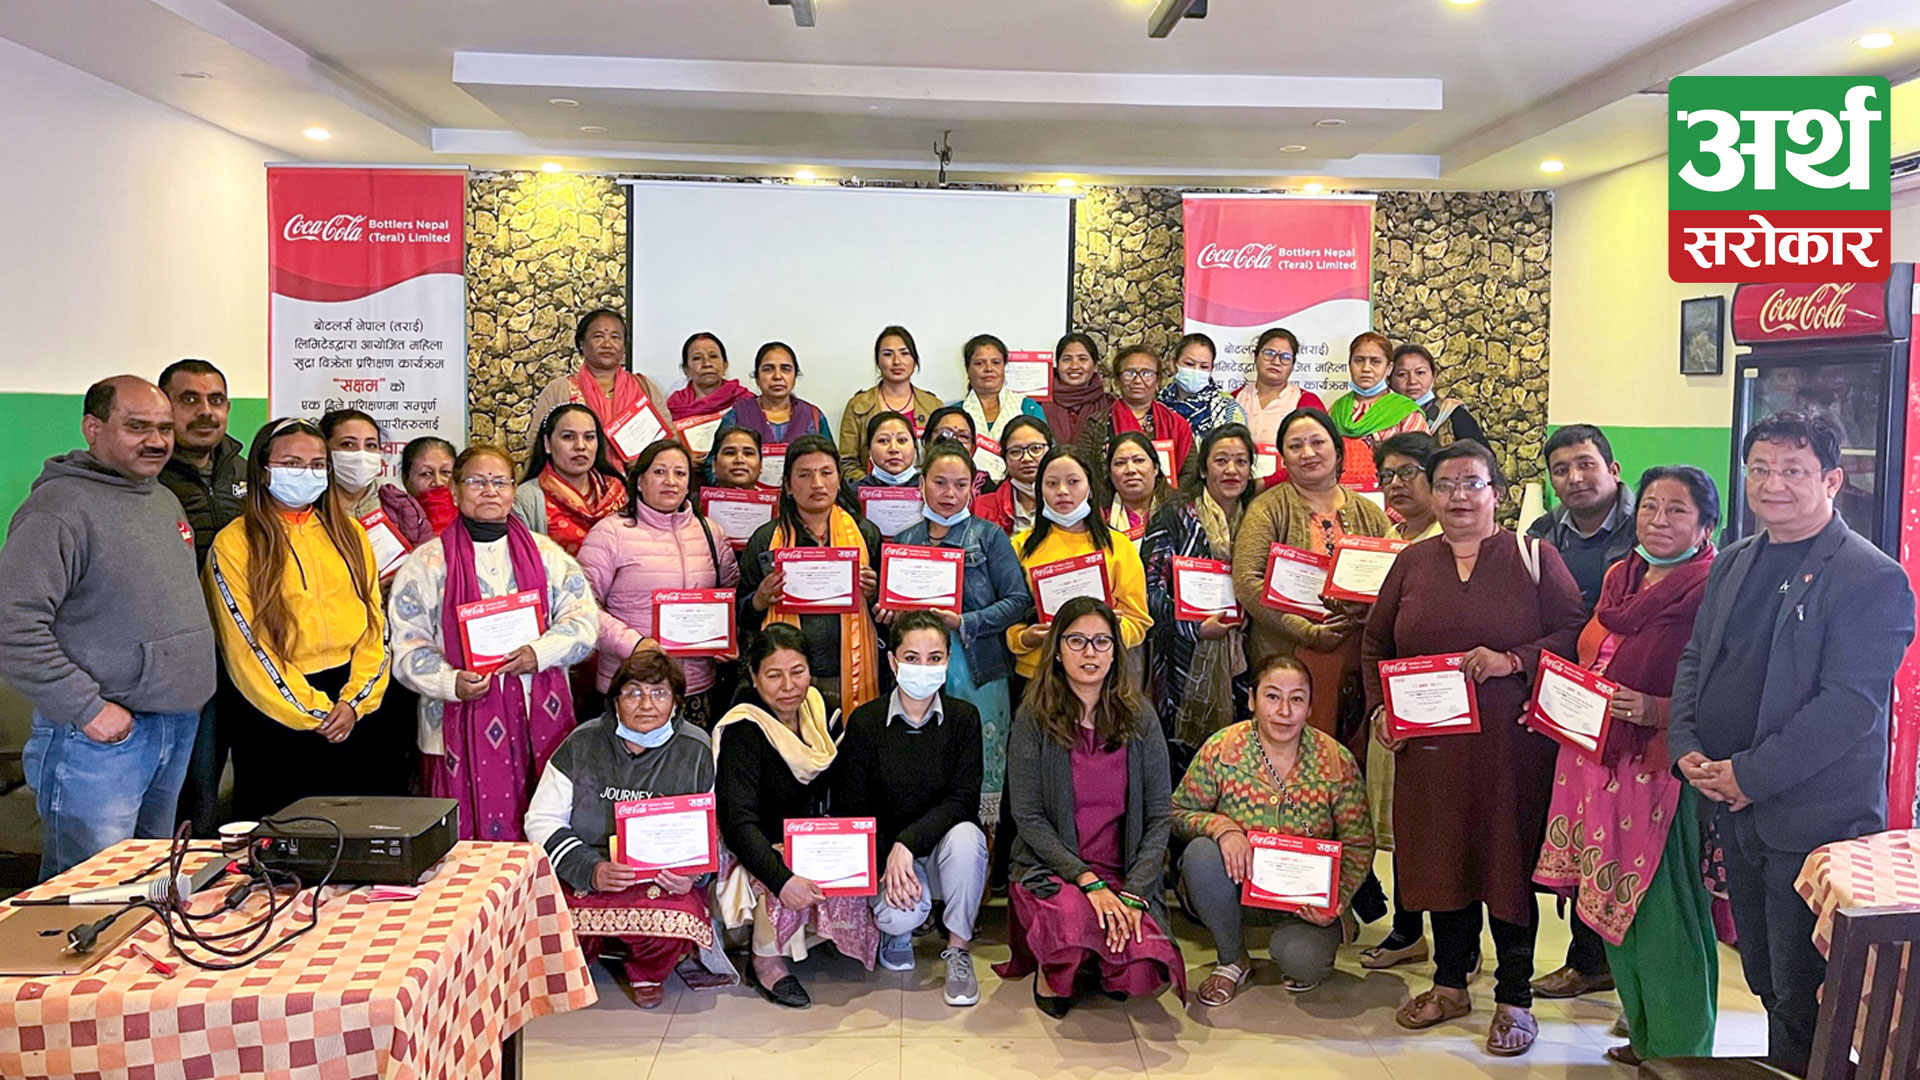 Coca-Cola Nepal Embarks on Providing Training to 1000 Women Across its Value Chain